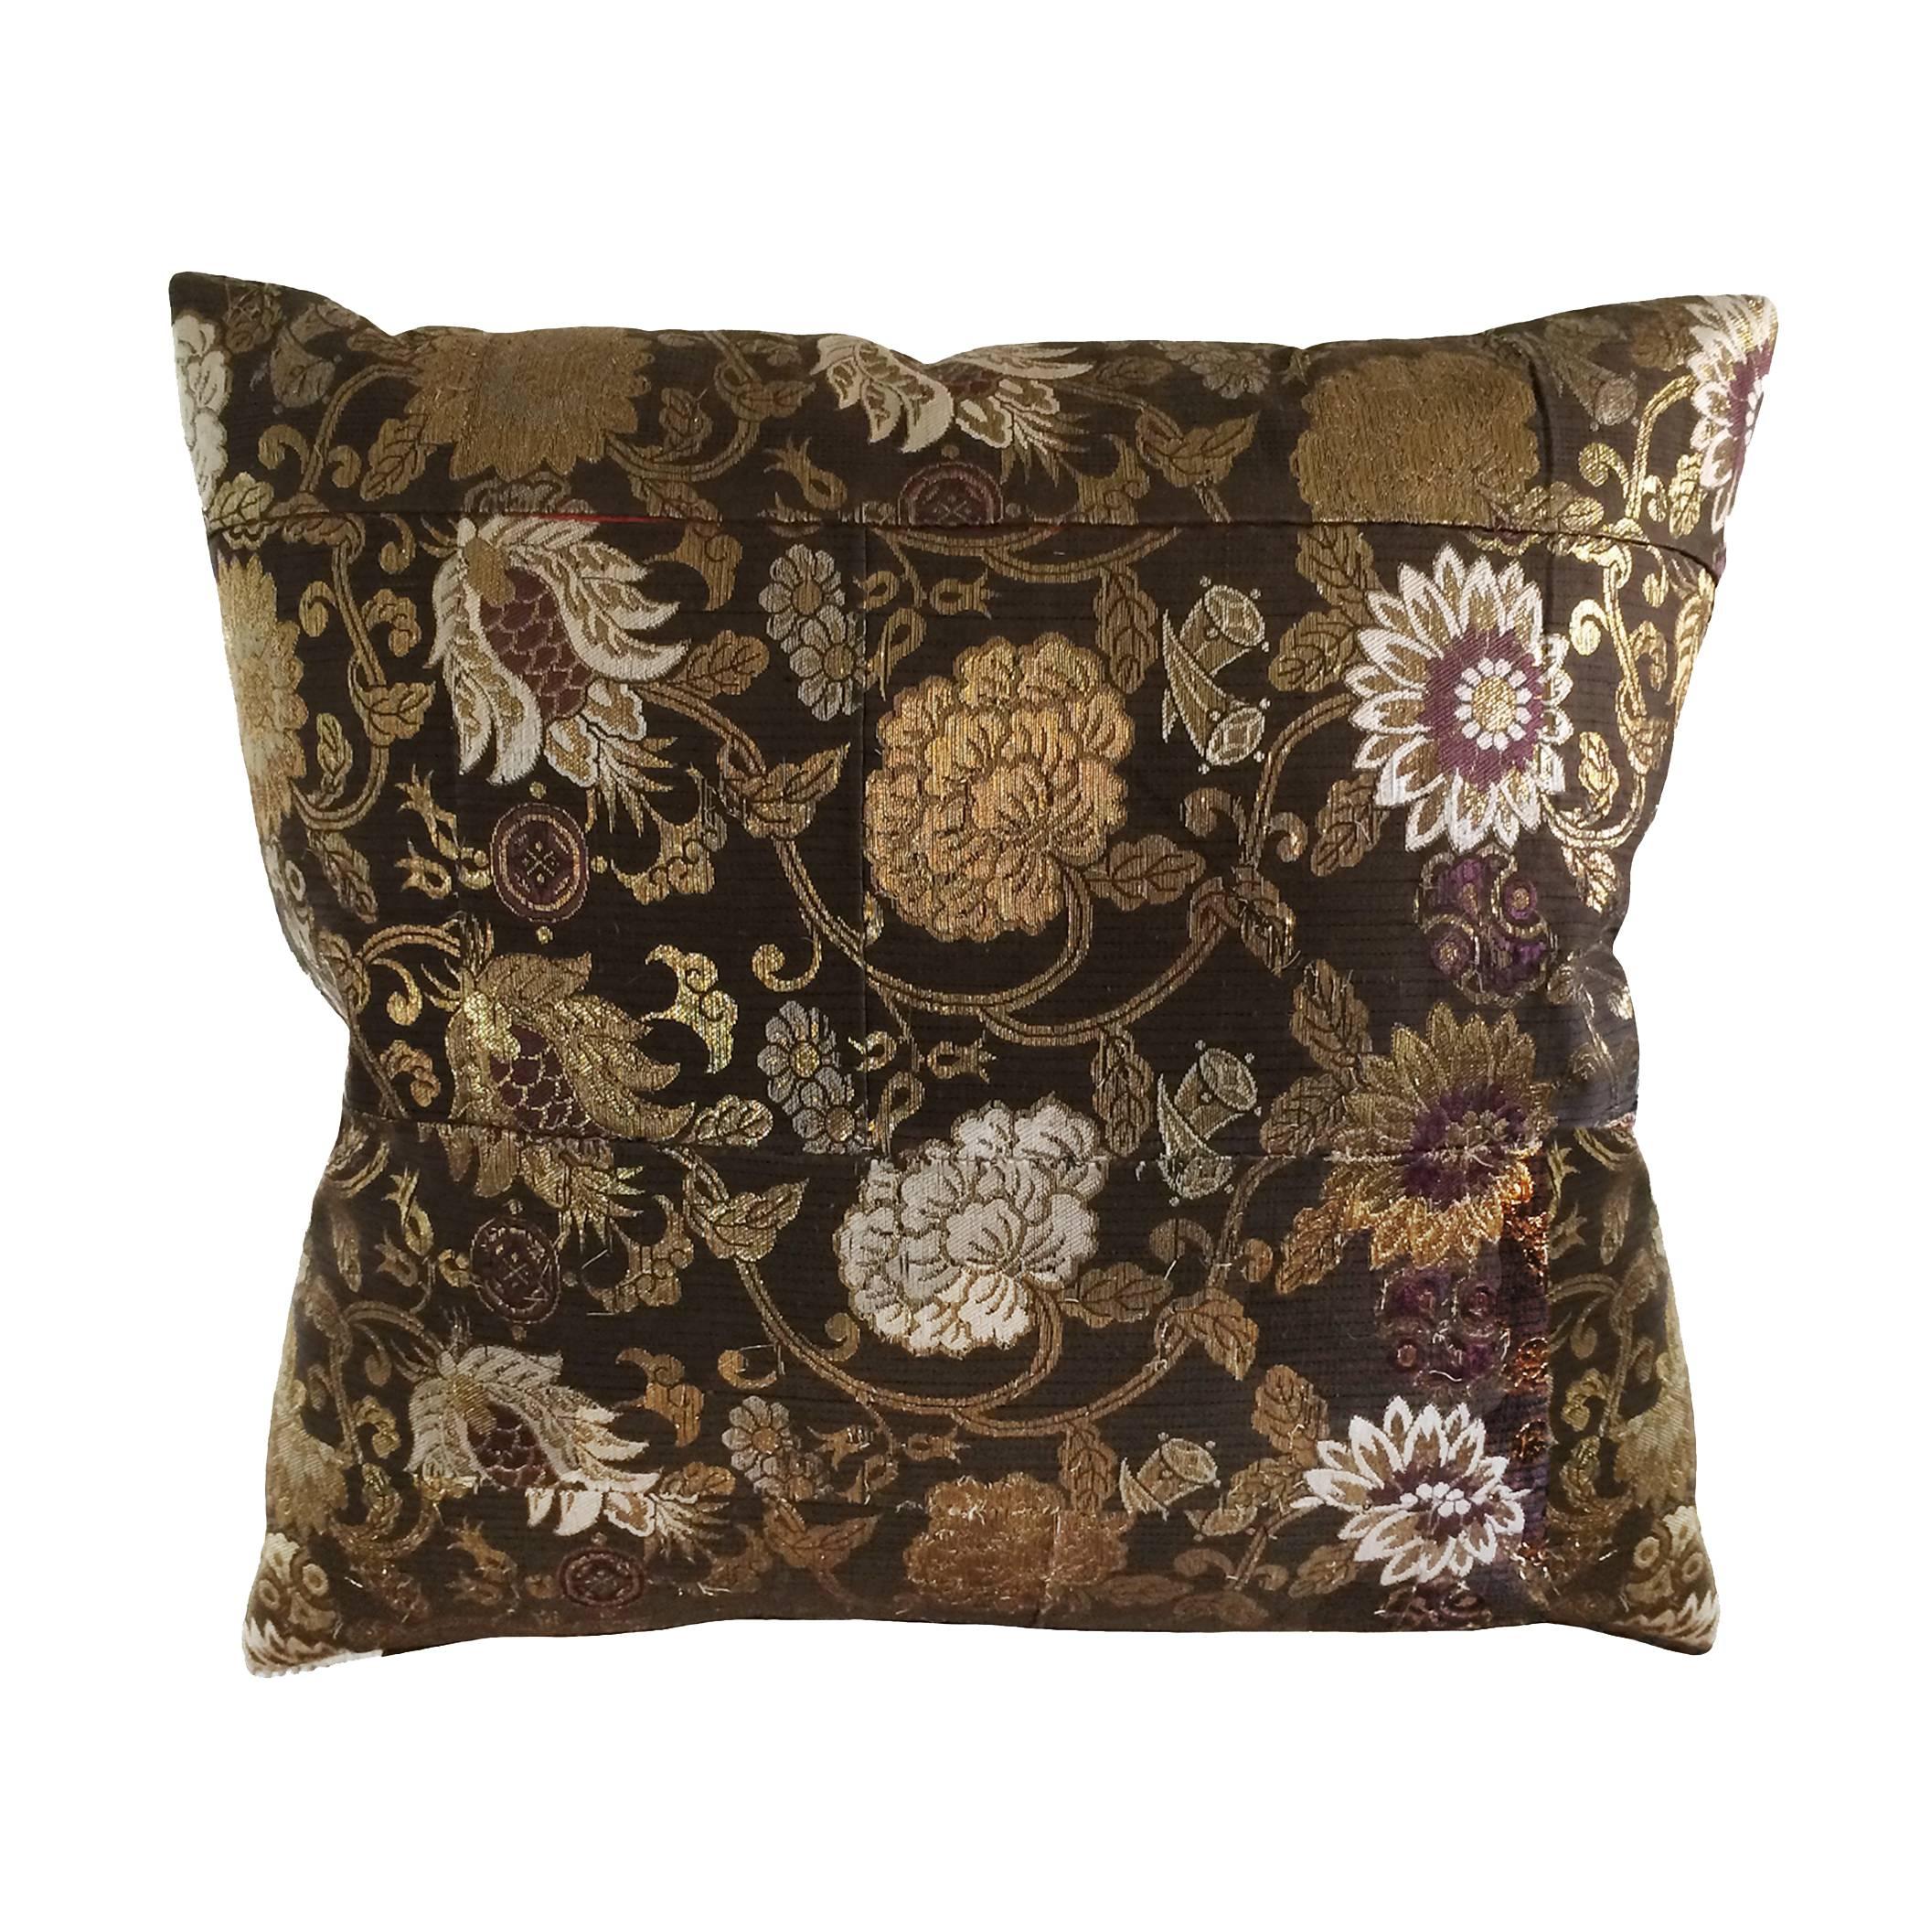 Custom Japanese Obi silk down pillow with red medallion emblem on one side and floral background on both sides; 19th century.